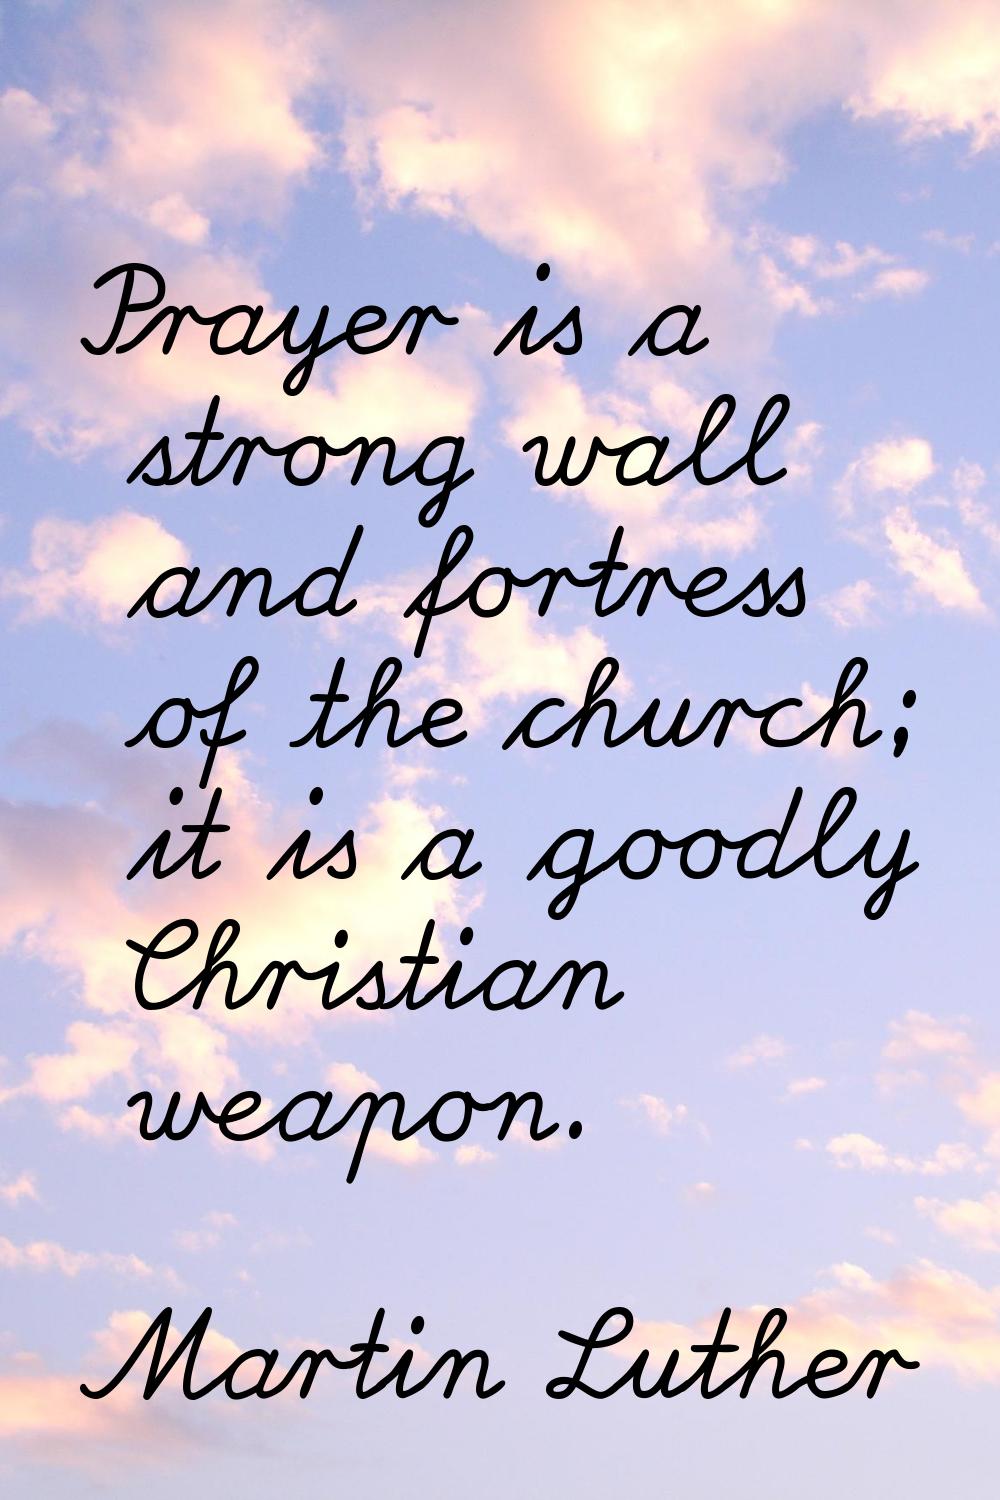 Prayer is a strong wall and fortress of the church; it is a goodly Christian weapon.